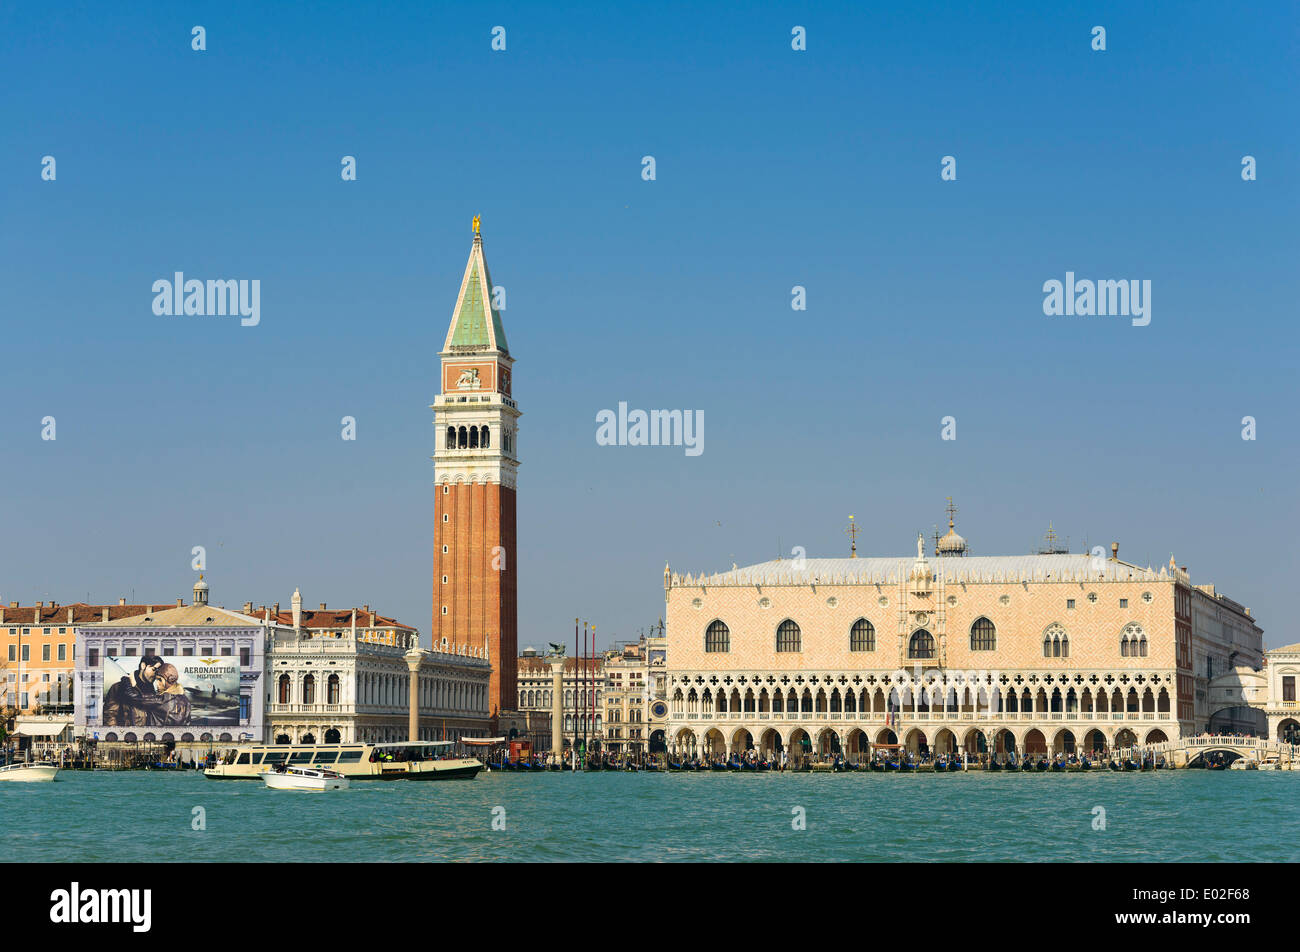 Campanile and the Doge's Palace, Palazzo Ducale, St. Mark's Square, Piazza San Marco, Venice, Veneto, Italy Stock Photo